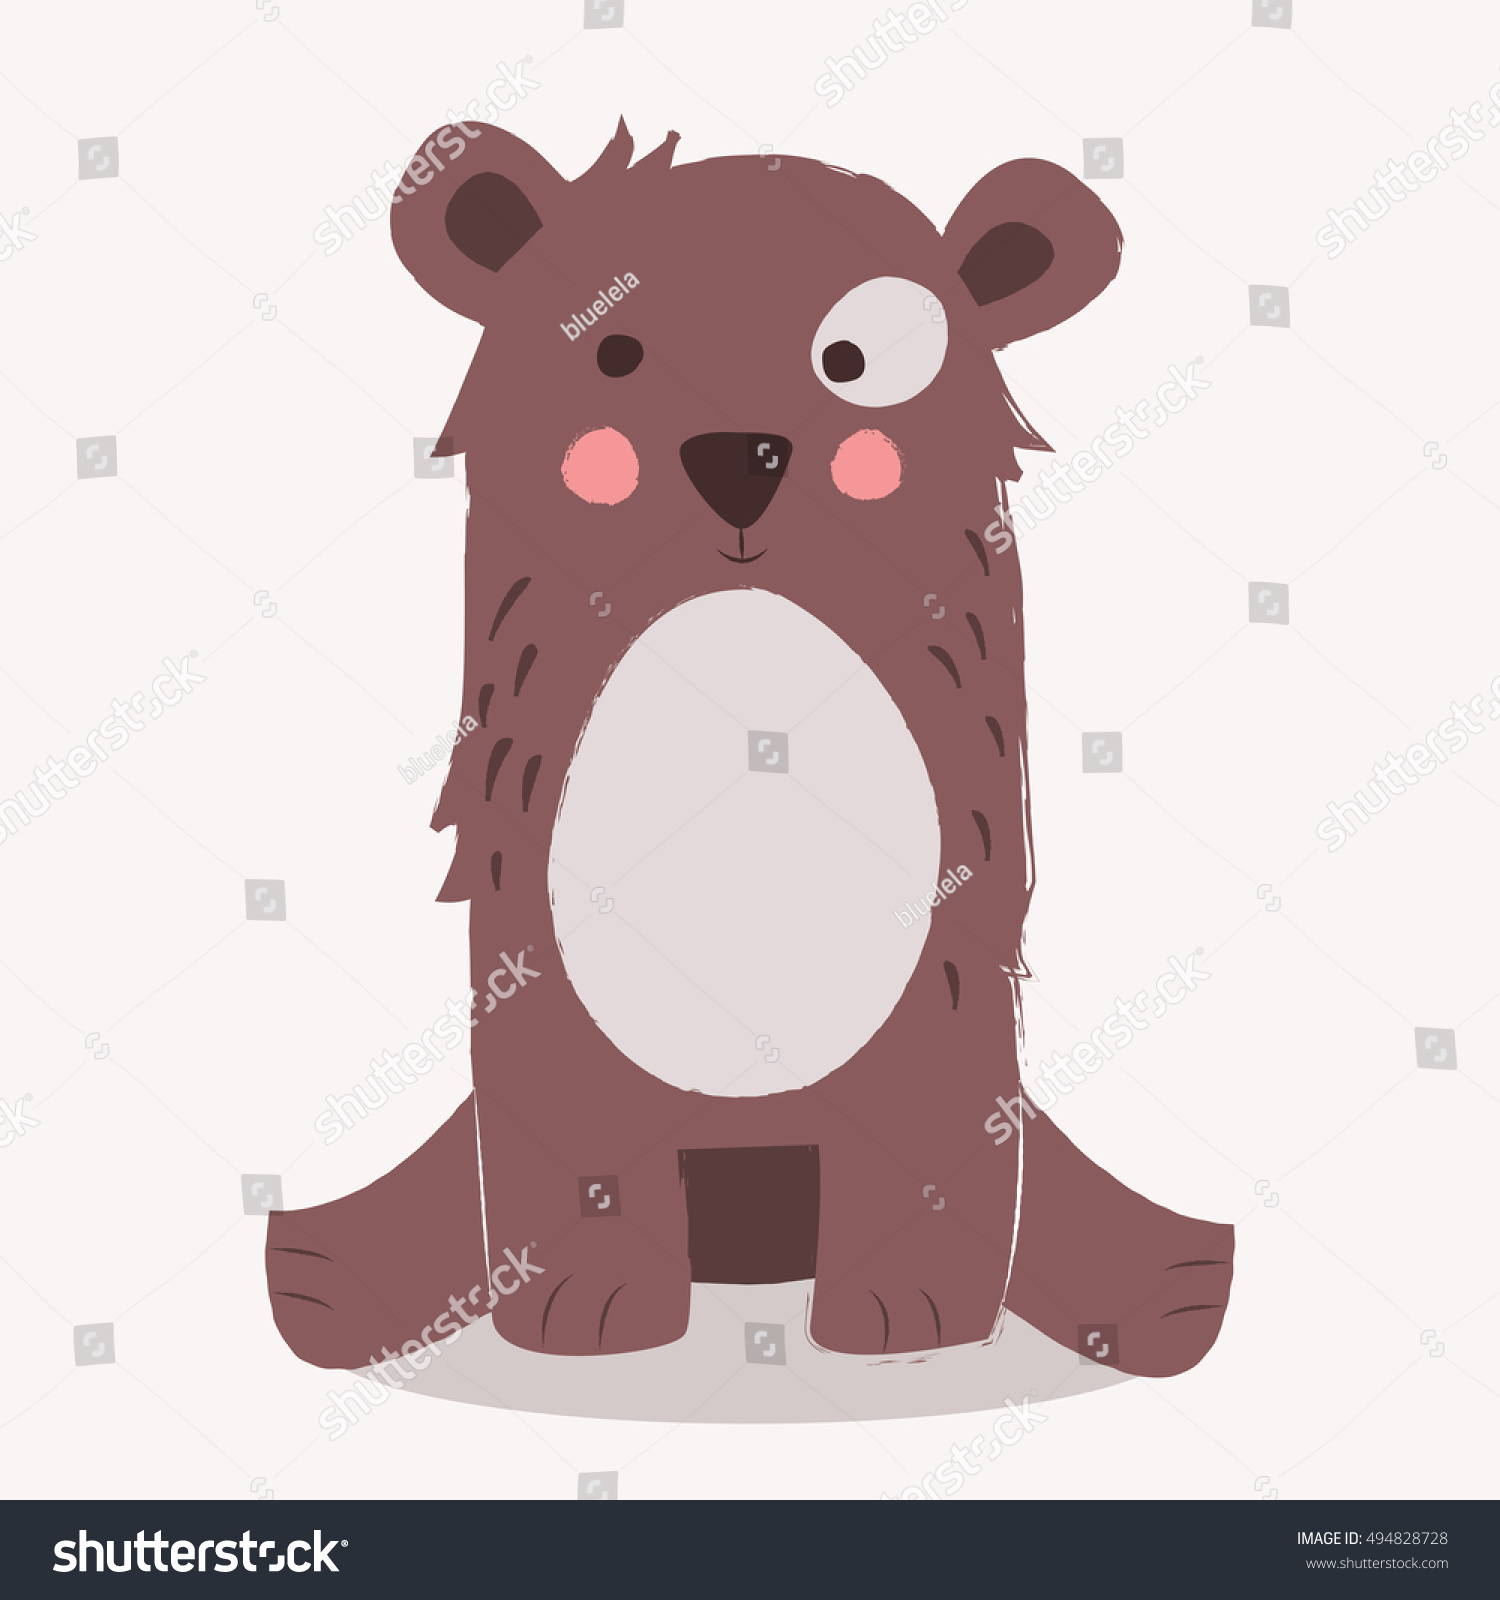 Cute Brown Bear Sitting On Ground Stock Vector Royalty Free Shutterstock